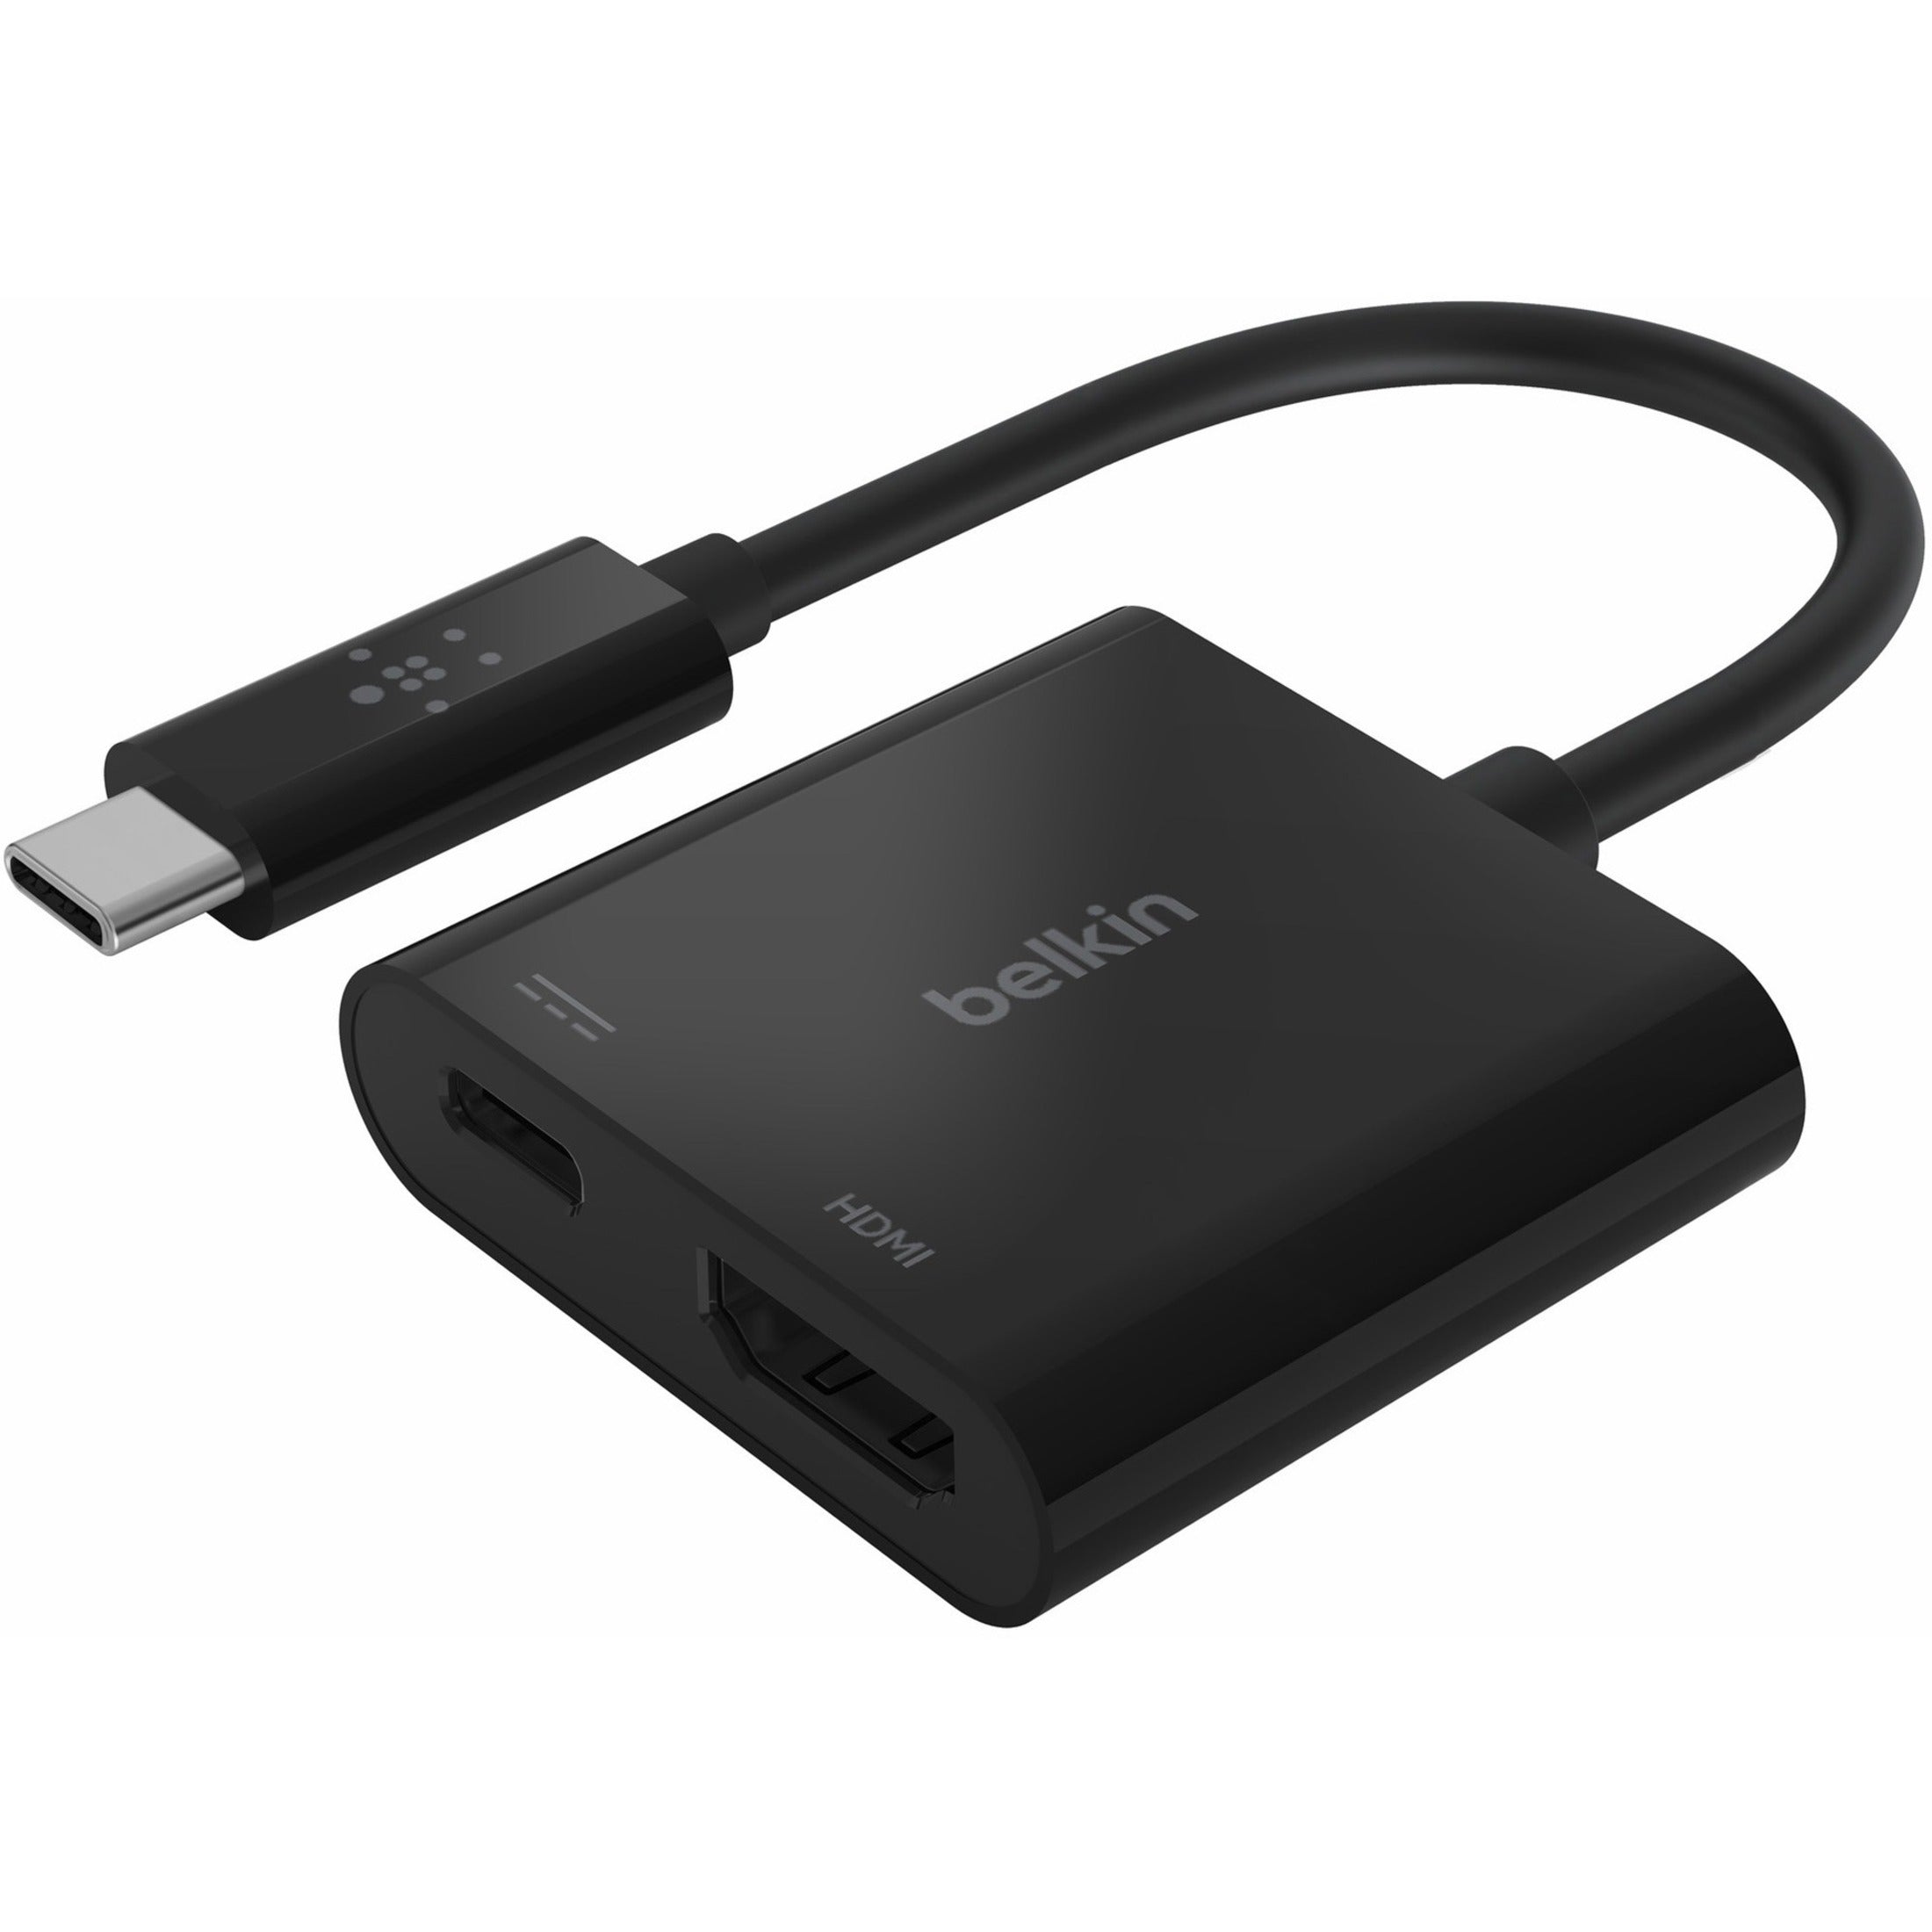 Belkin AVC002BK-BL USB-C to HDMI + Charge Adapter, Plug and Play, 4K Resolution Support